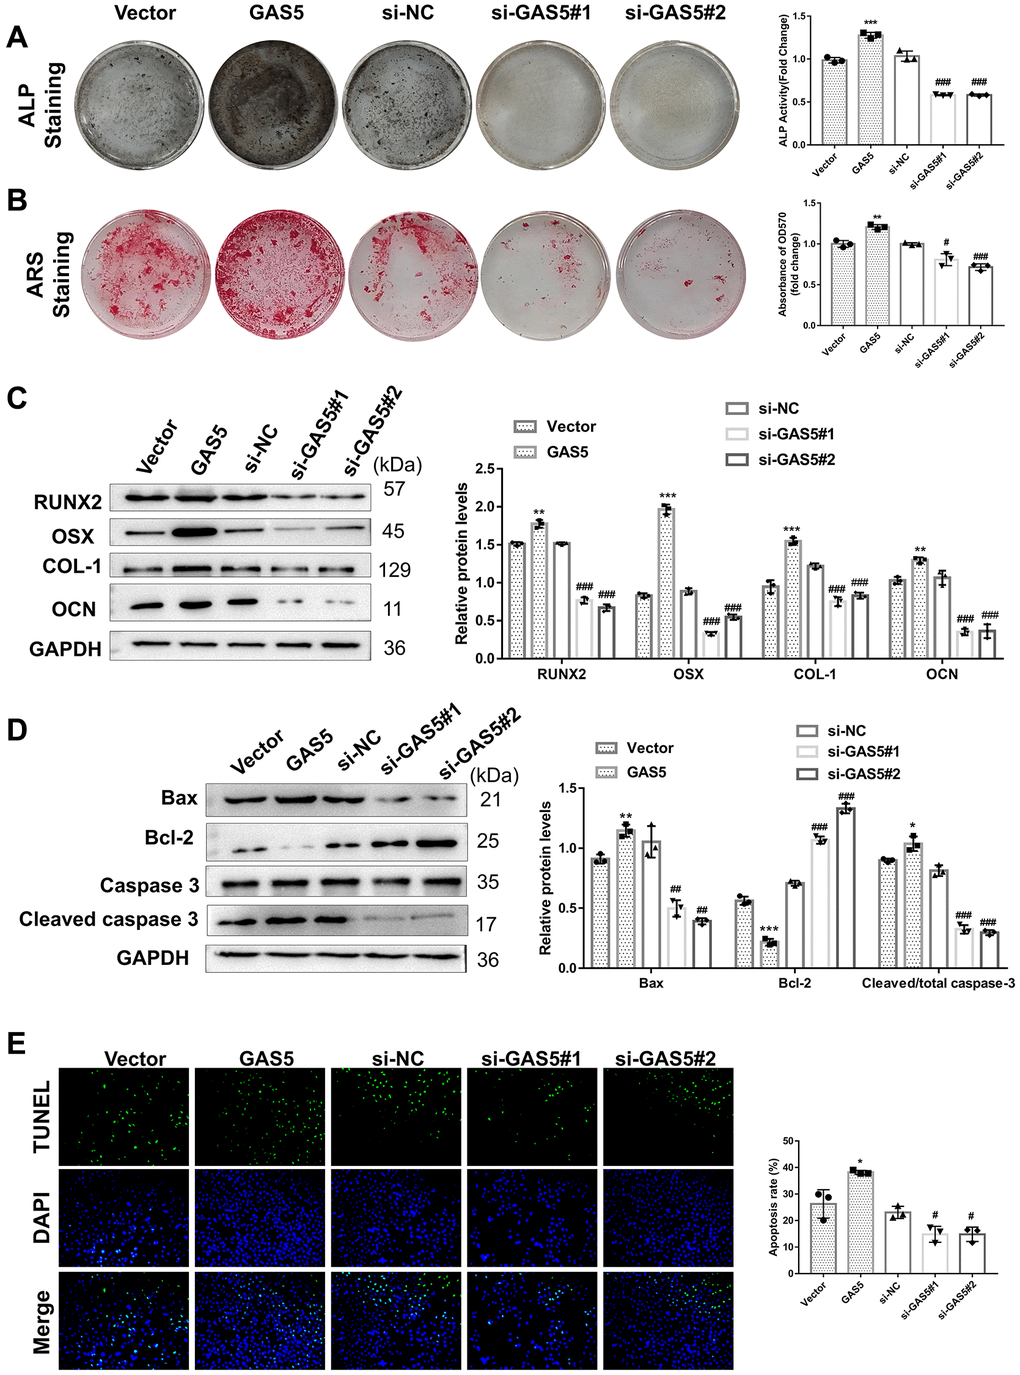 LncRNA GAS5 facilitates Afs apoptosis and osteogenic differentiation. AFs were transiently infected with the overexpression plasmid or GAS5 siRNA, while an empty vector and si-NC were used as negative controls. (A) The osteogenic differentiation-related markers were detected using a western blotting assay (n = 3). The osteogenic differentiation level of AFs with different transfections was evaluated by (B) ALP and (C) ARS assays. (n = 3) (D) The expressions of apoptosis-related proteins were detected by western blotting (n = 3). (E) TUNEL staining assay was performed to analyze the apoptosis of AFs (n = 3). (**p ***p #p ##p ###p 